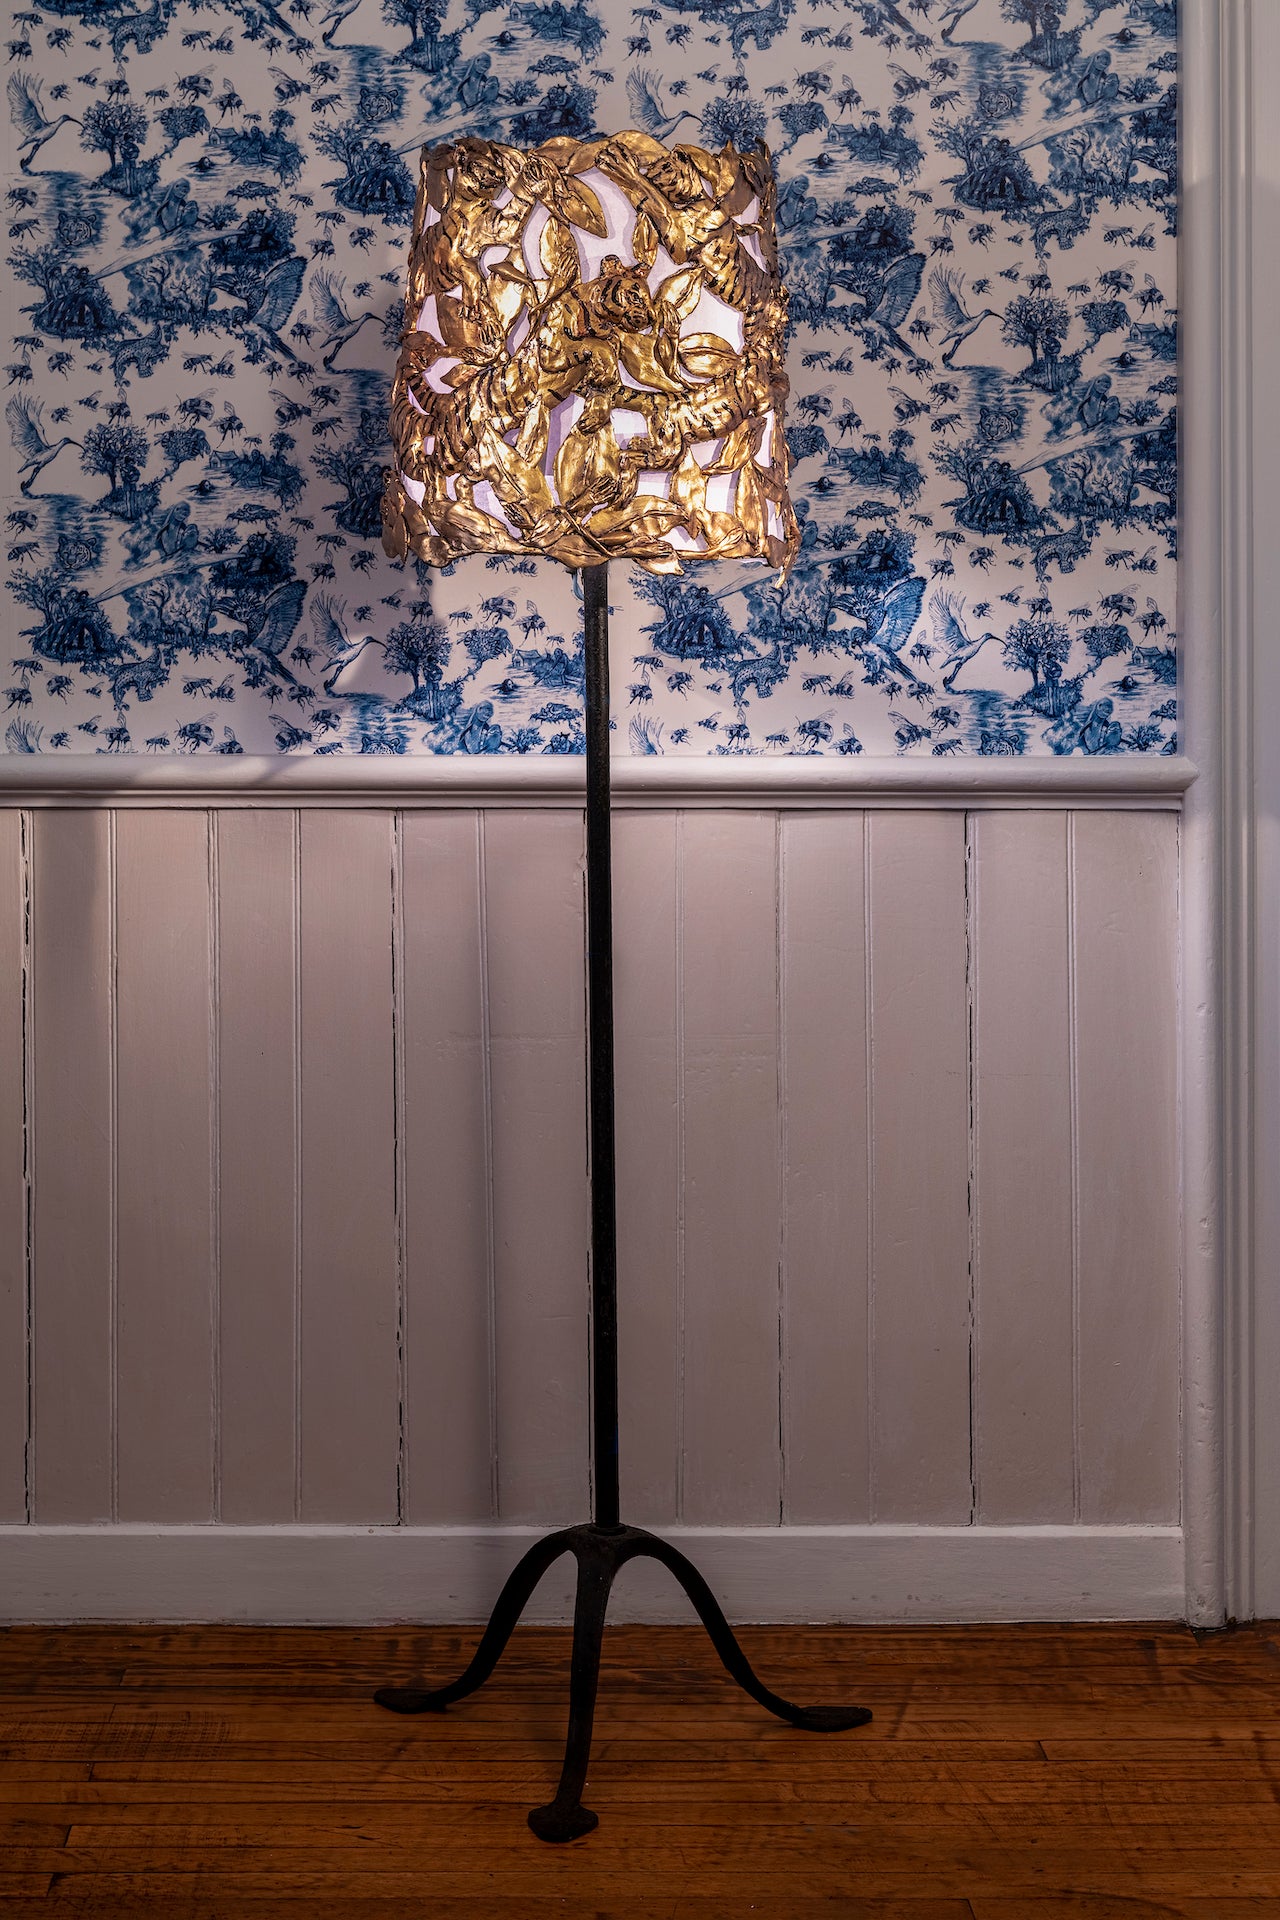 Jessica Hargreaves, "Tigers and Mangrove Lamp"